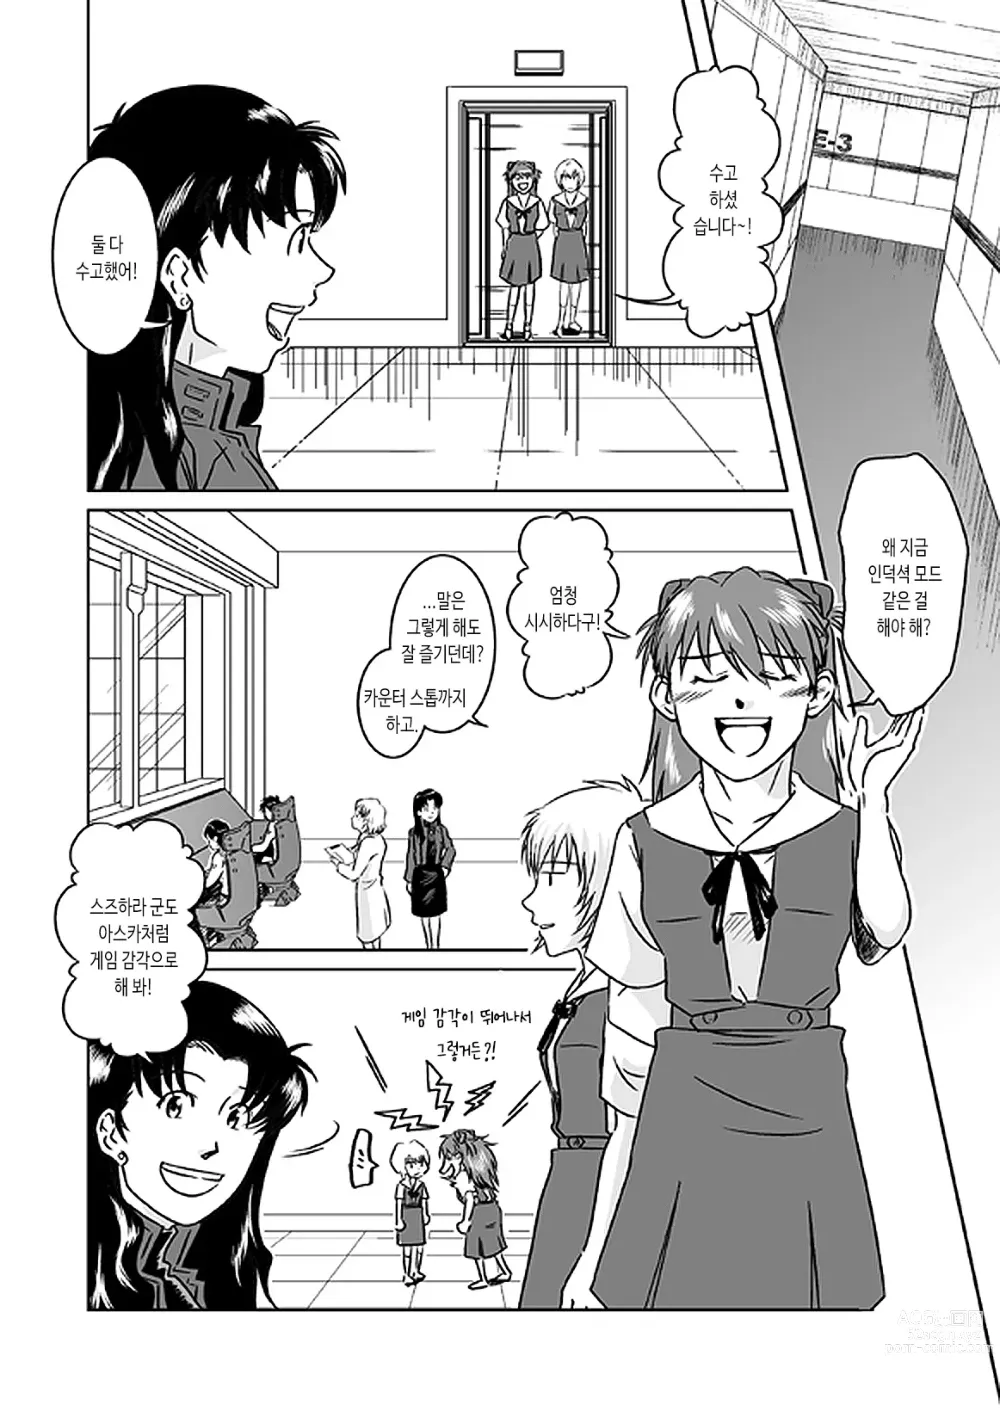 Page 10 of doujinshi 스즈하라 능욕